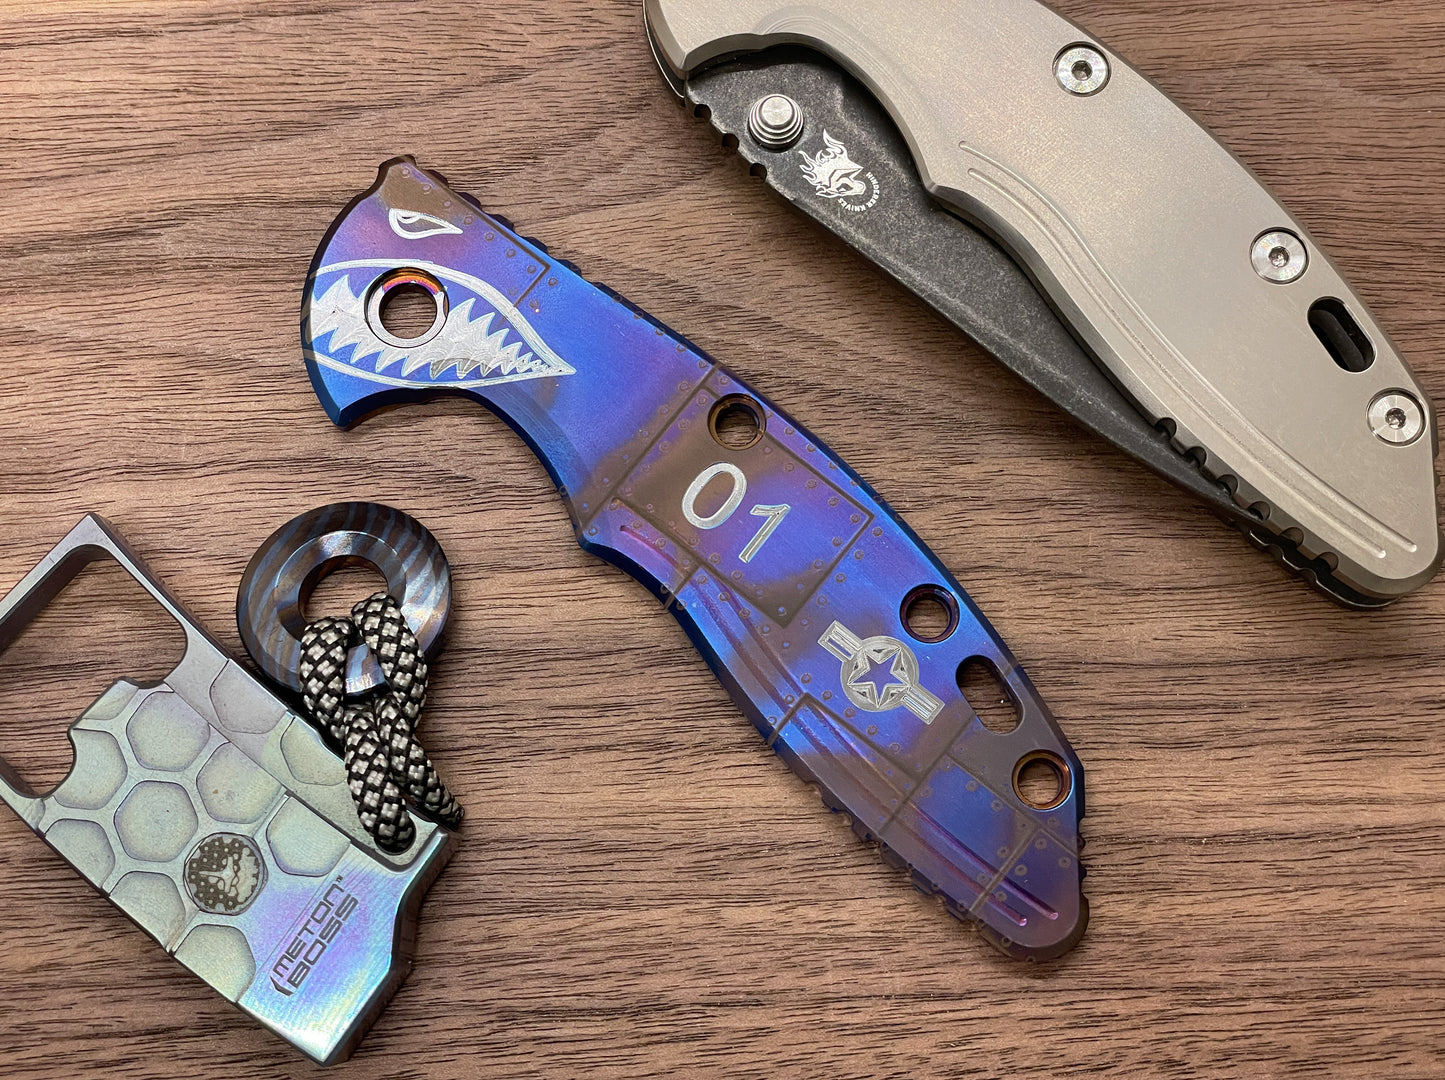 P40 Riveted Flamed Titanium scale for XM-18 3.5 HINDERER